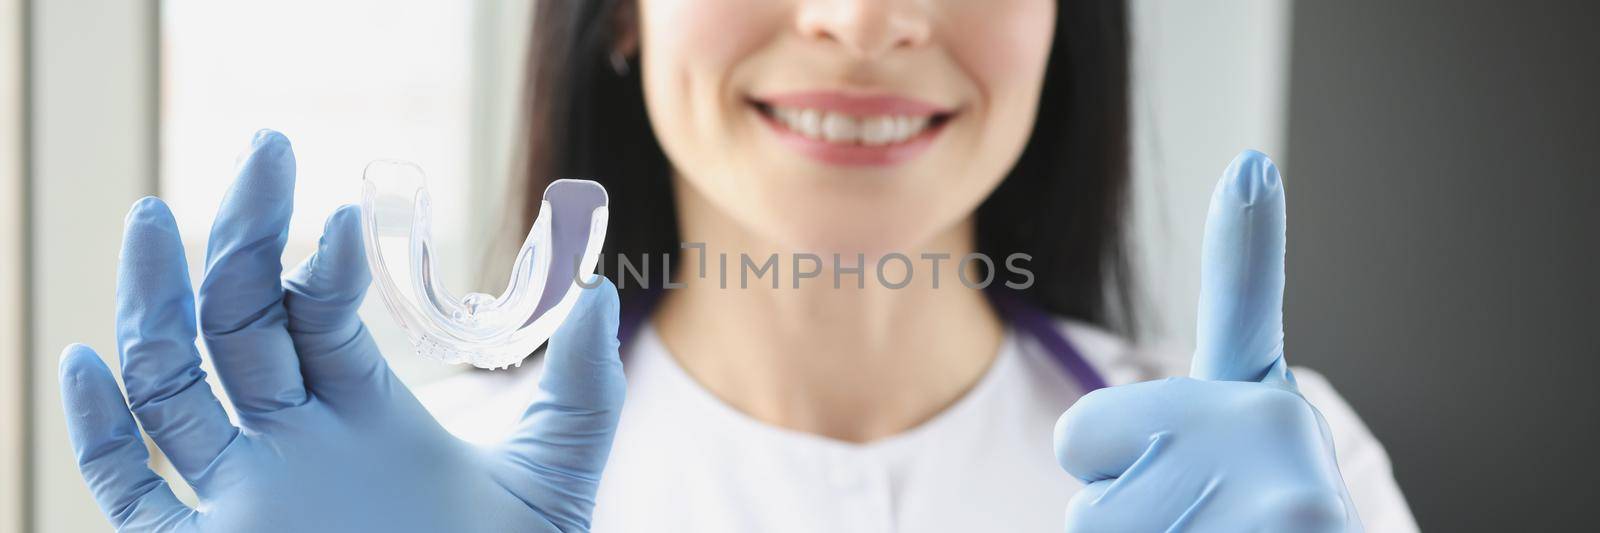 Stomatologist holding mouthguard for teeth and showing thumb up sign by kuprevich